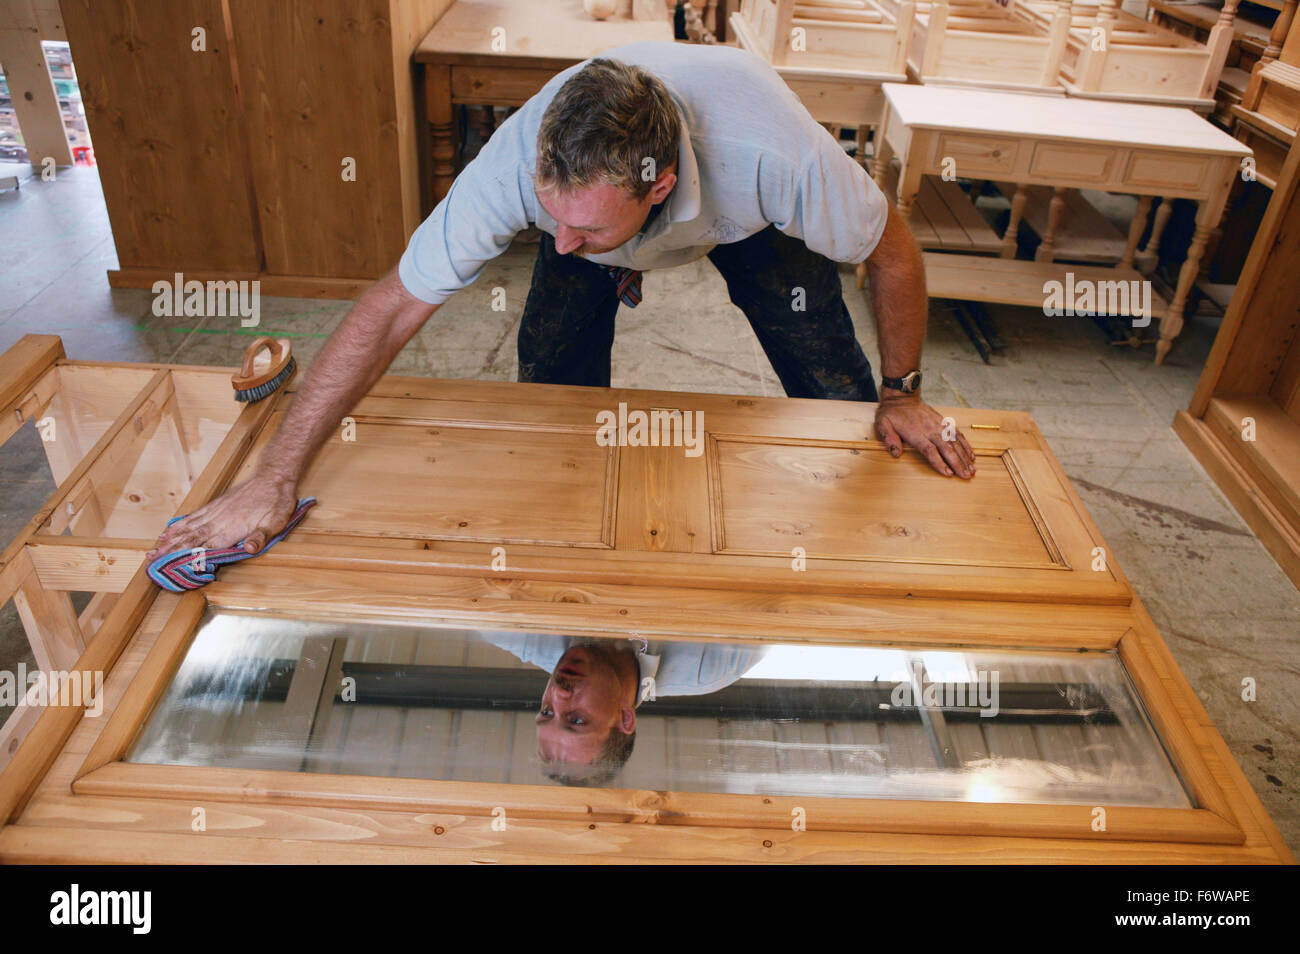 Man With Learning Disabilities Making Pine Furniture Stock Photo